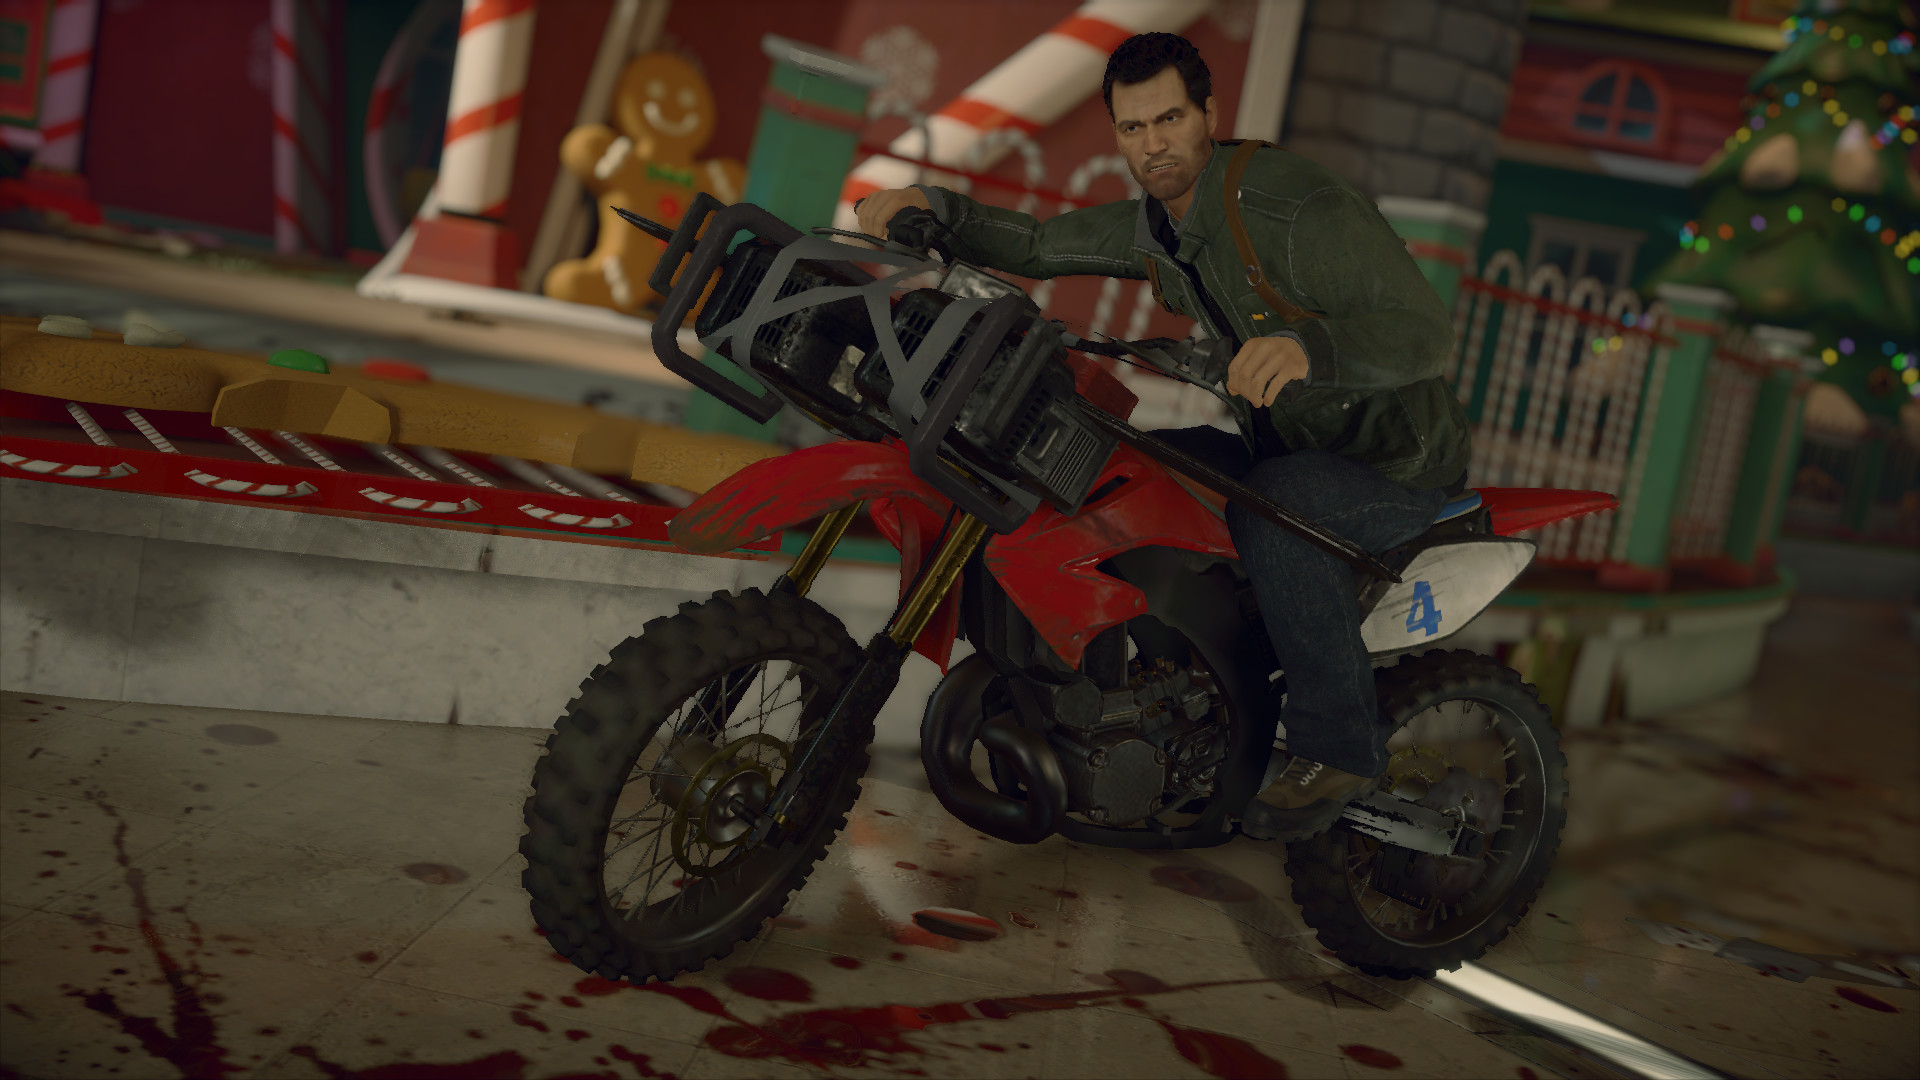 Dead Rising 4 - Slicecycle Featured Screenshot #1